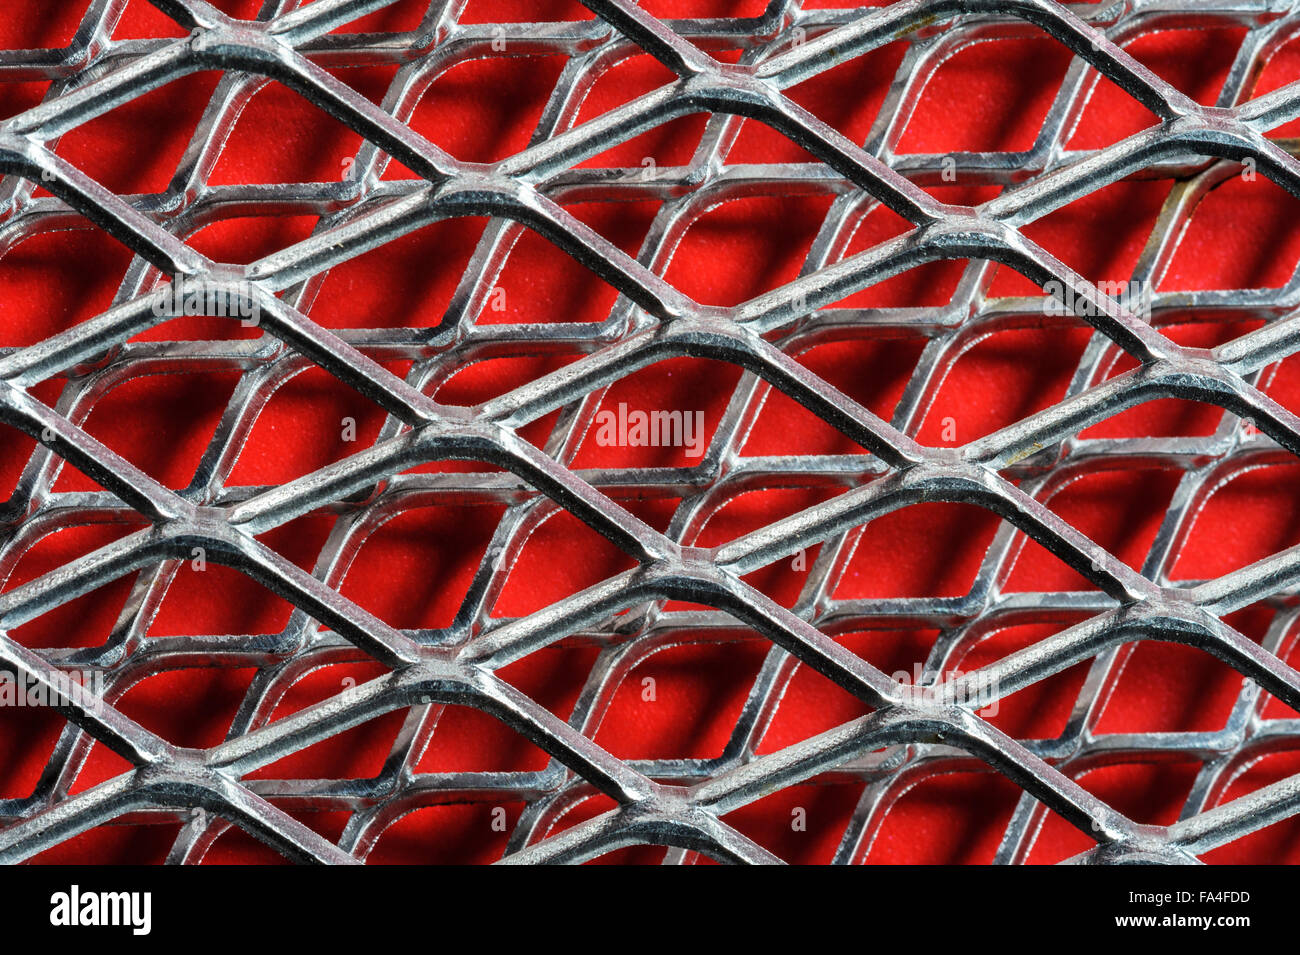 Macro detail of soft alloy, small mesh material. Stock Photo